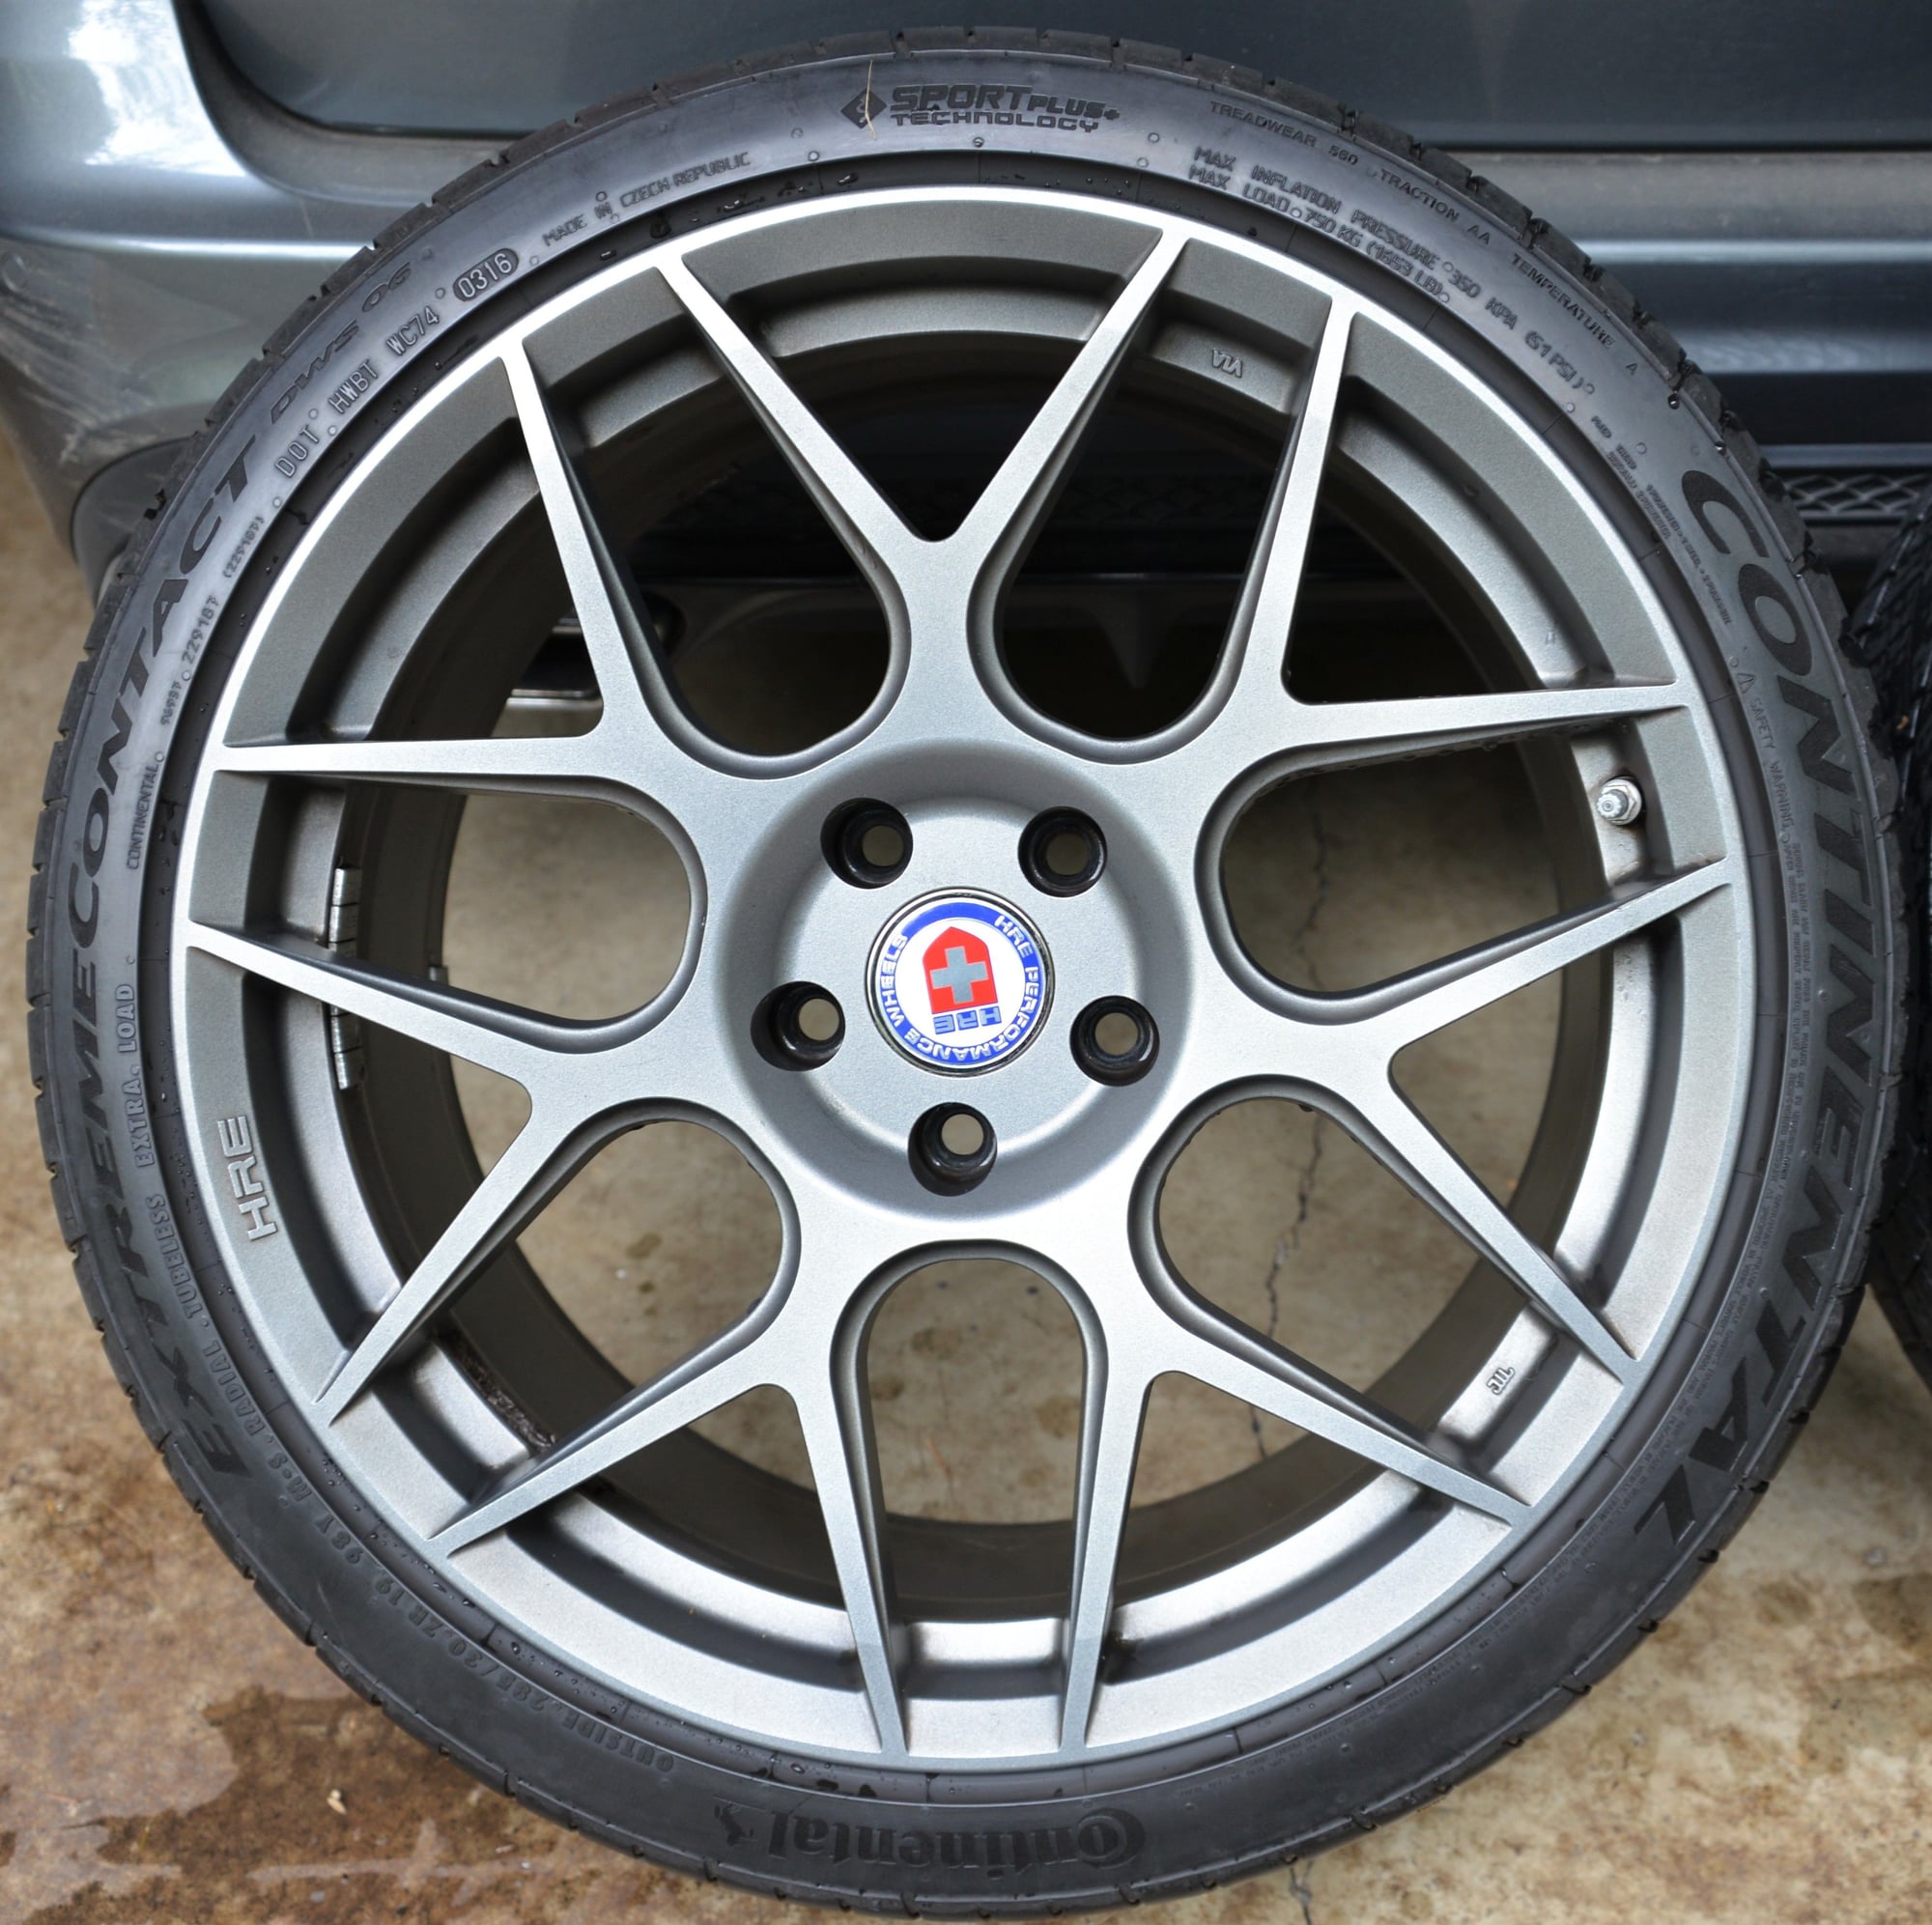 Wheels and Tires/Axles - 19" HRE Wheels and Tires for Mercedes/AMG - $1500 - Used - All Years Mercedes-Benz E63 AMG S - Sherwood, OR 97140, United States